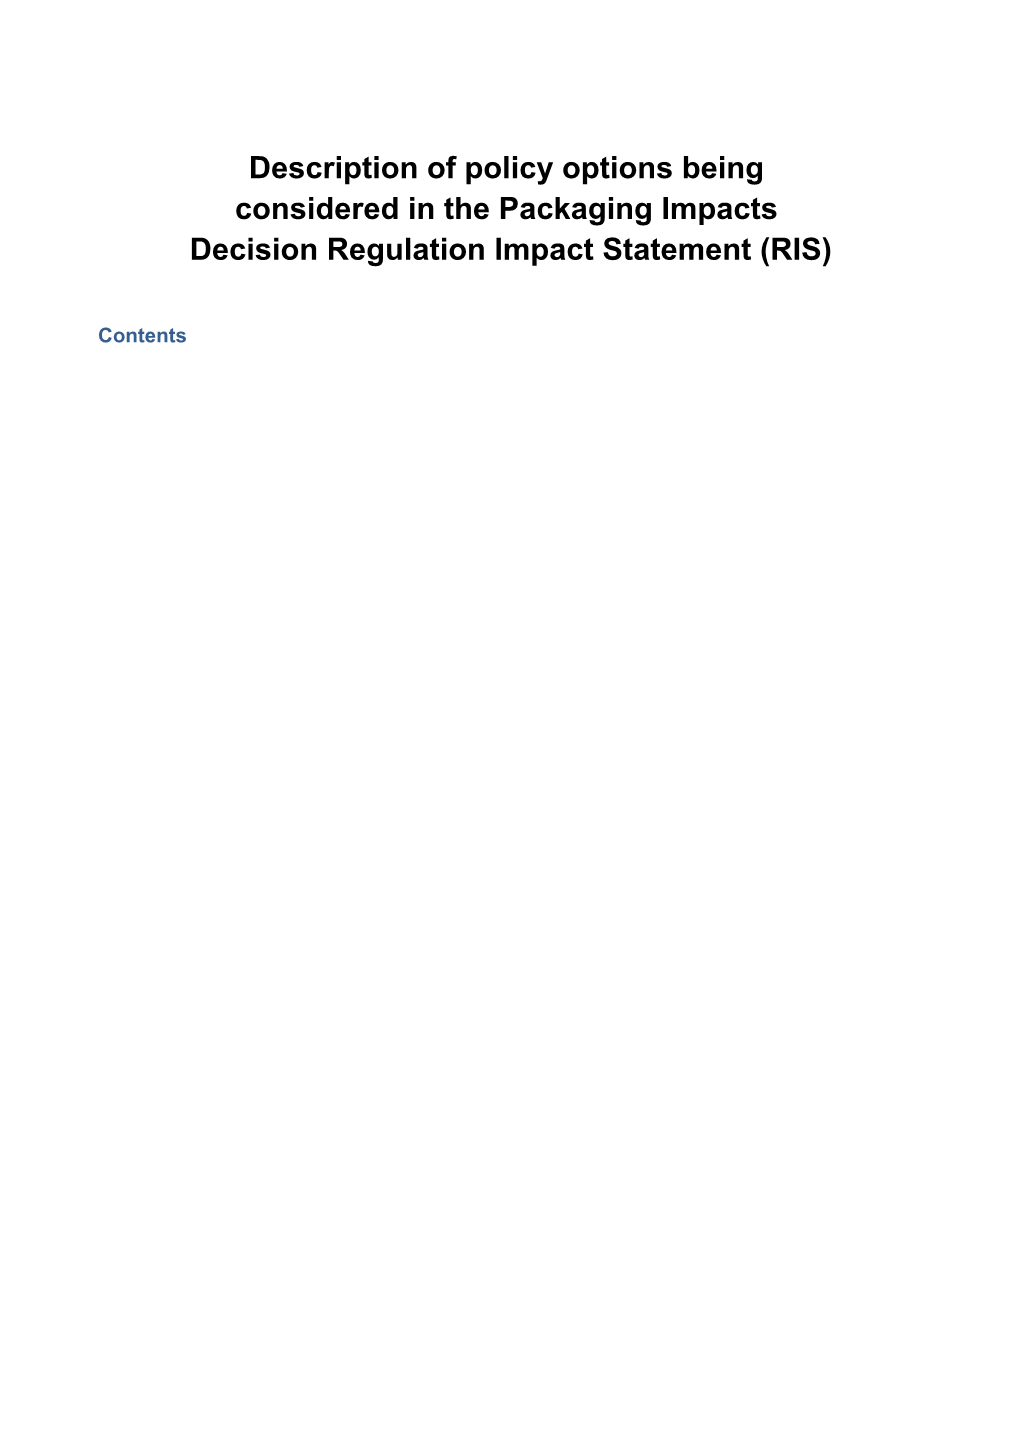 Description of Policy Options Being Considered in the Packaging Impacts Decision Regulation